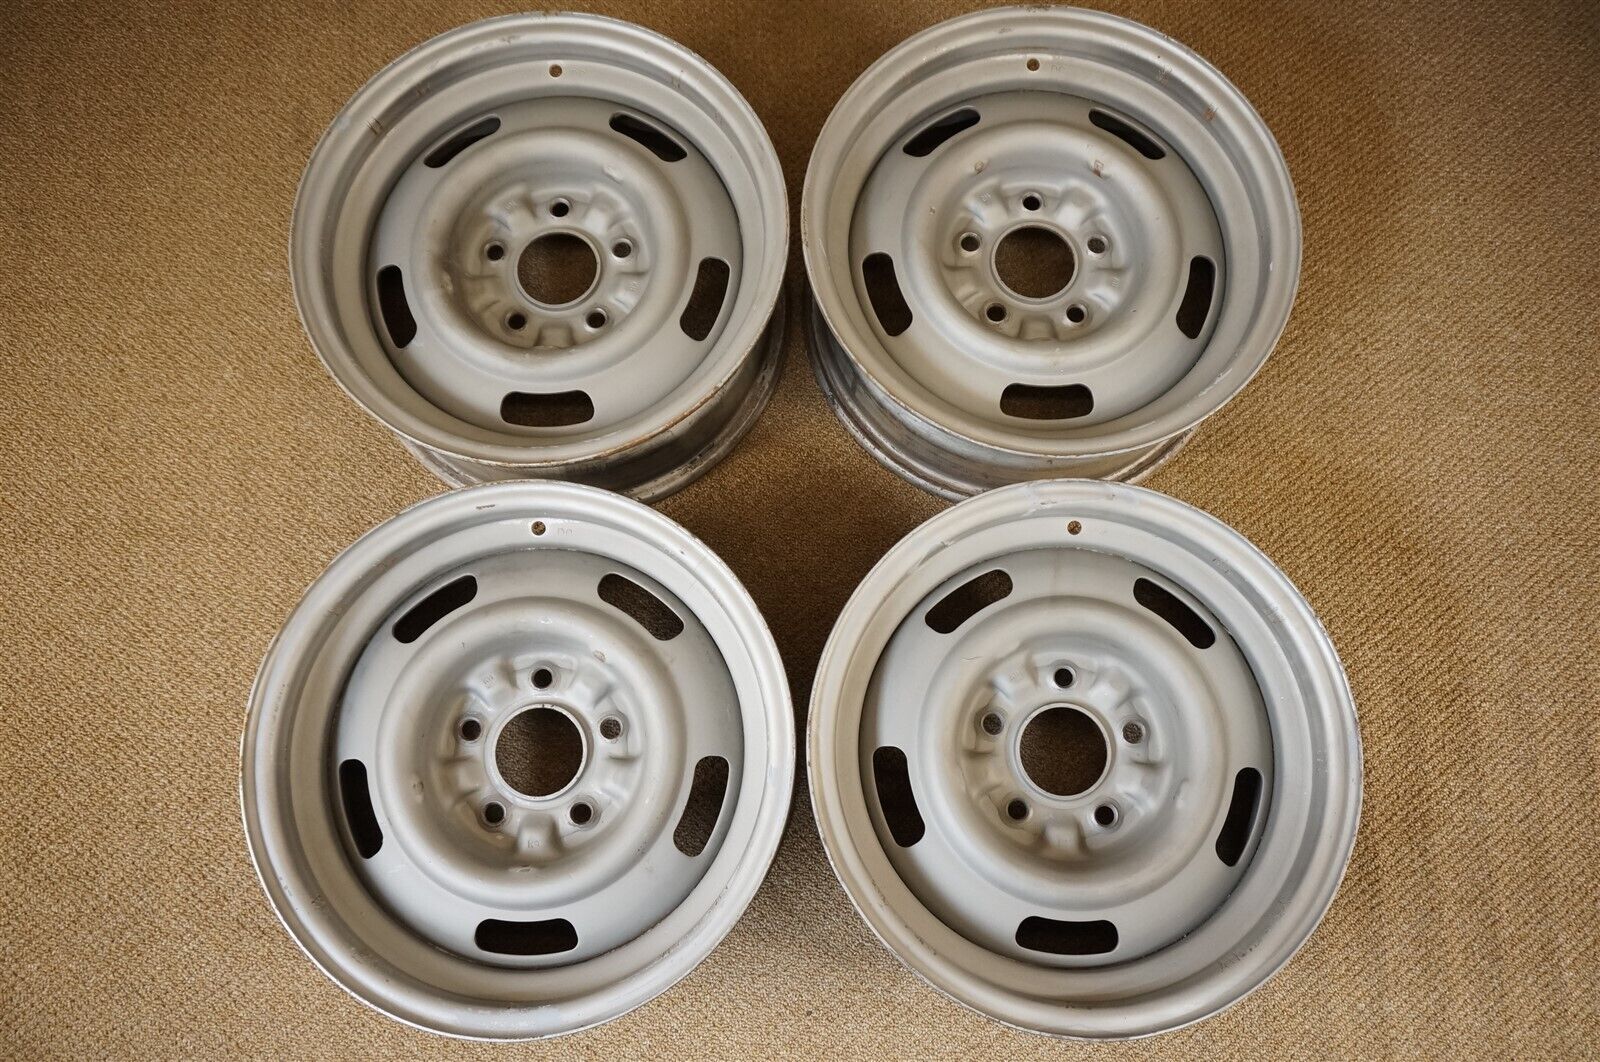 Early OEM 1967 Corvette Large DC Rally Wheels 15x6 Matched Dated Set KH 